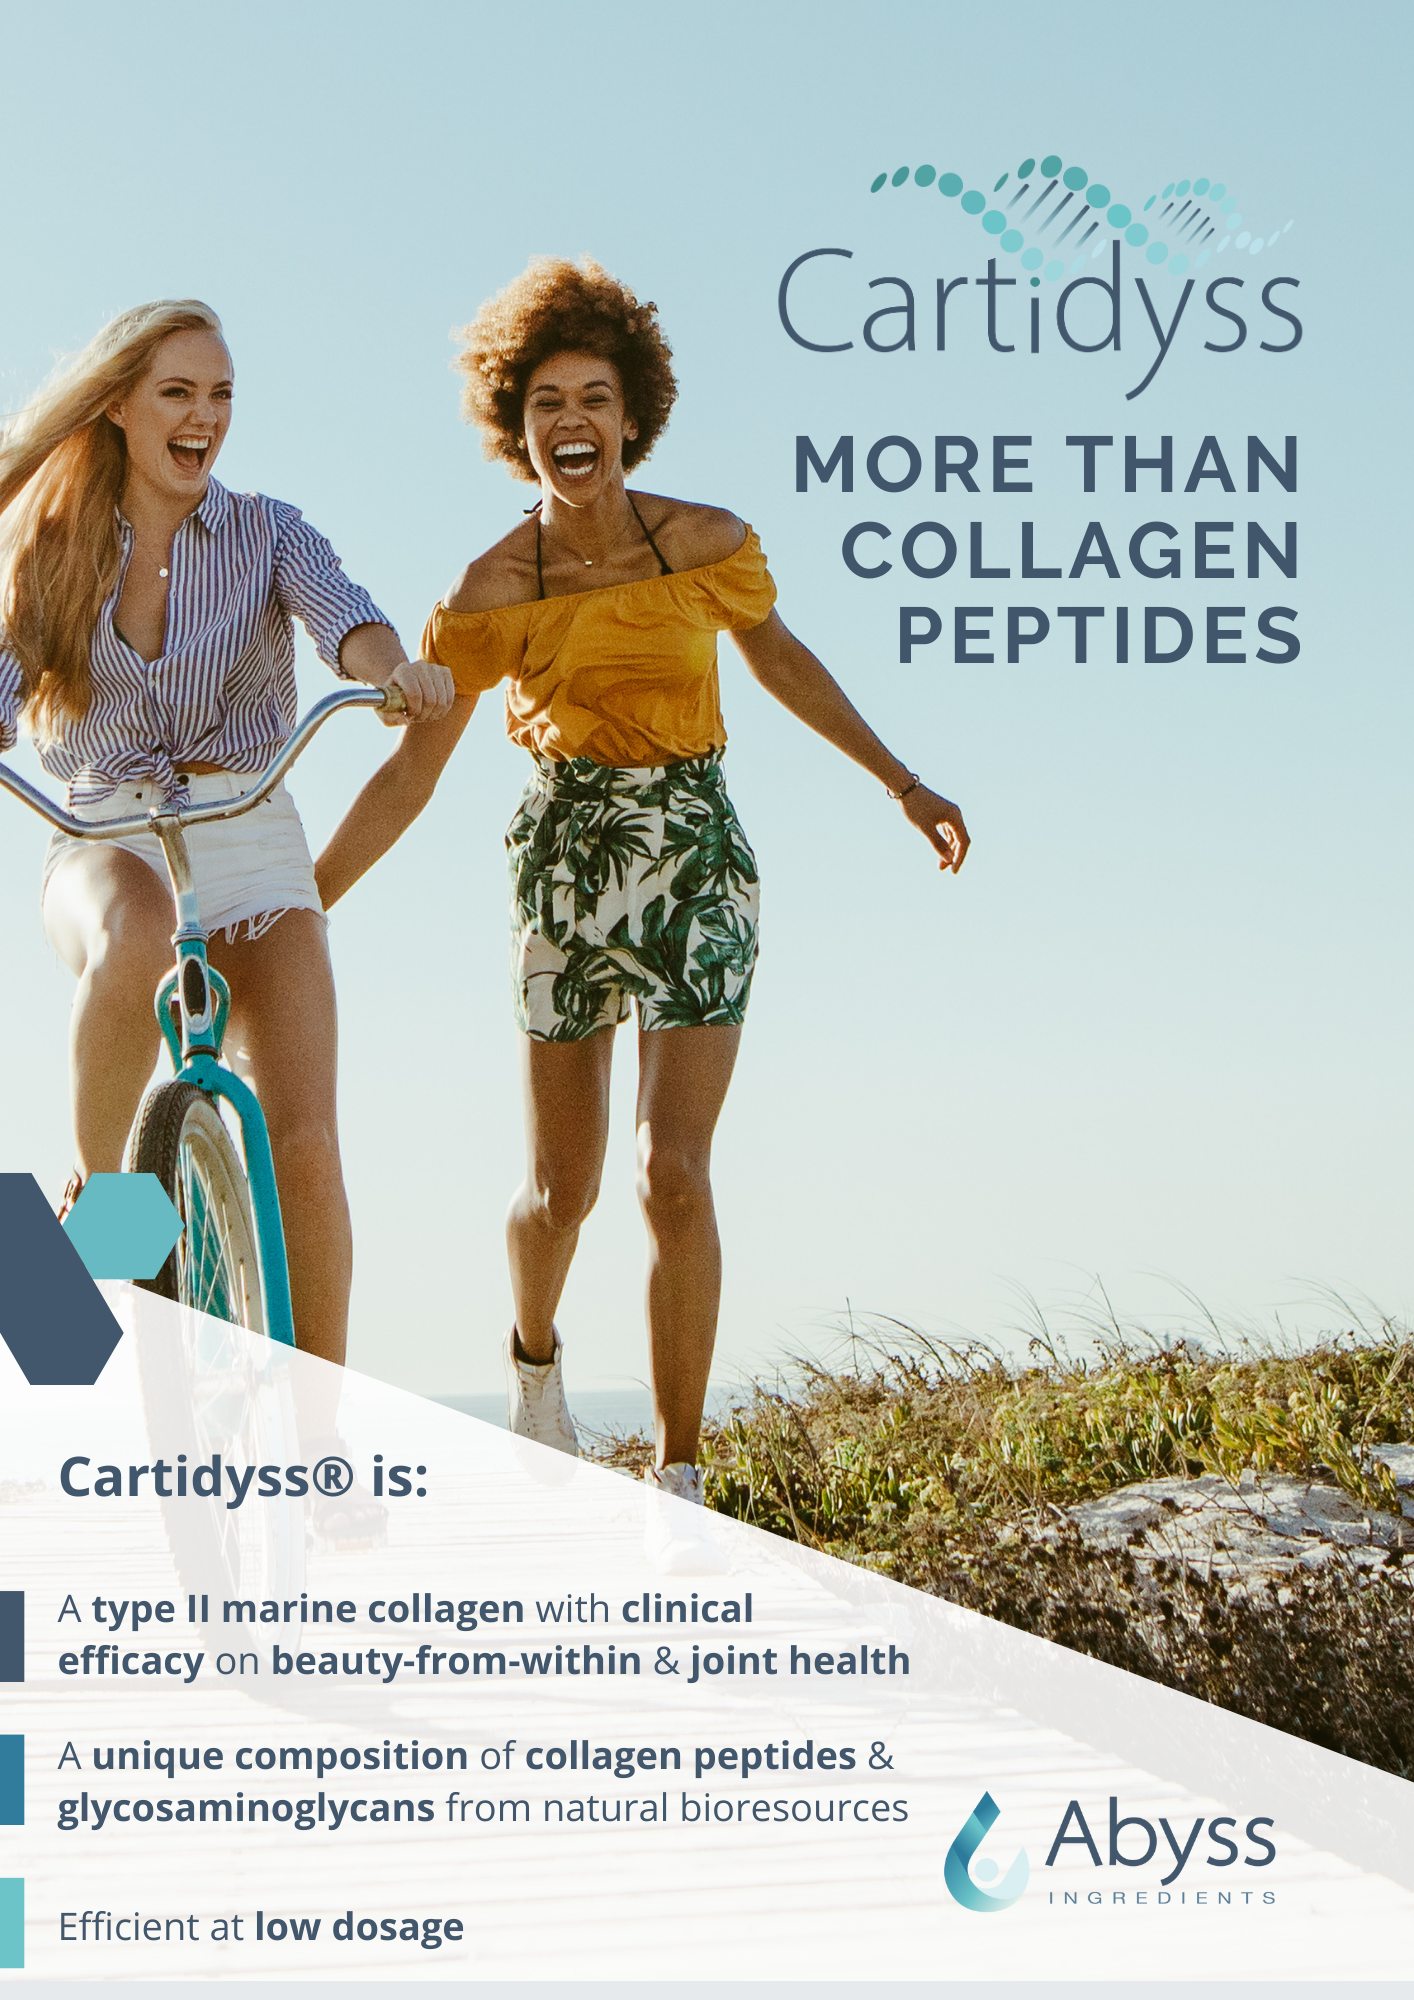 Cartidyss, much more than collagen peptides